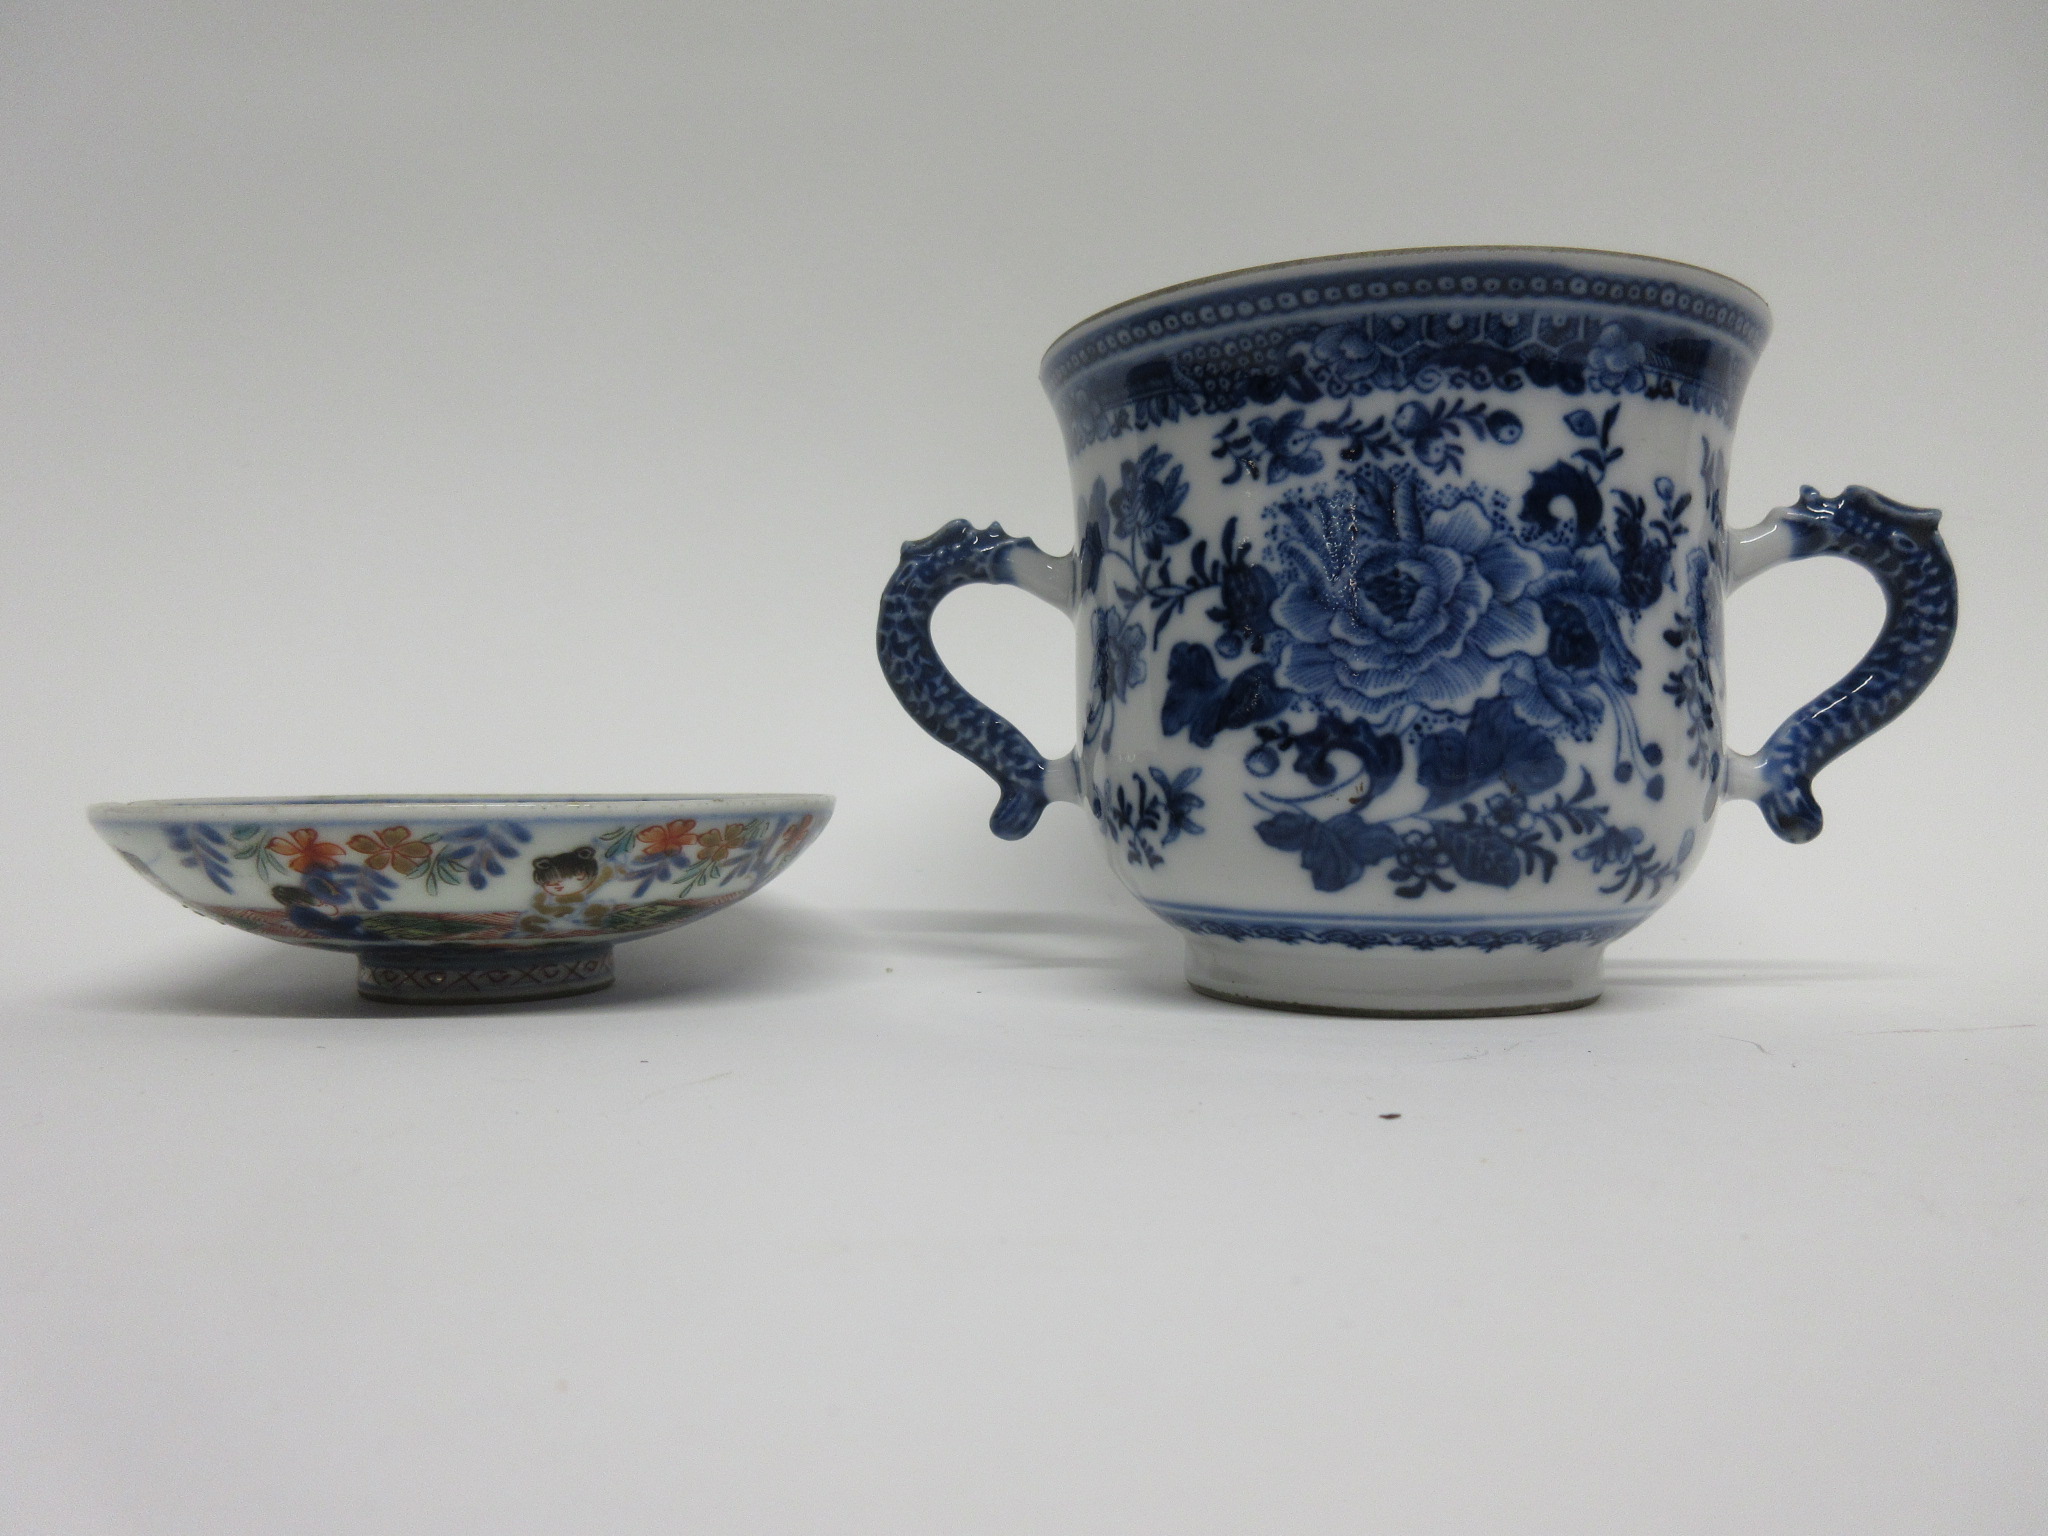 Late 18th/early 19th century Chinese porcelain blue and white jar and associated cover, the jar with - Image 2 of 4